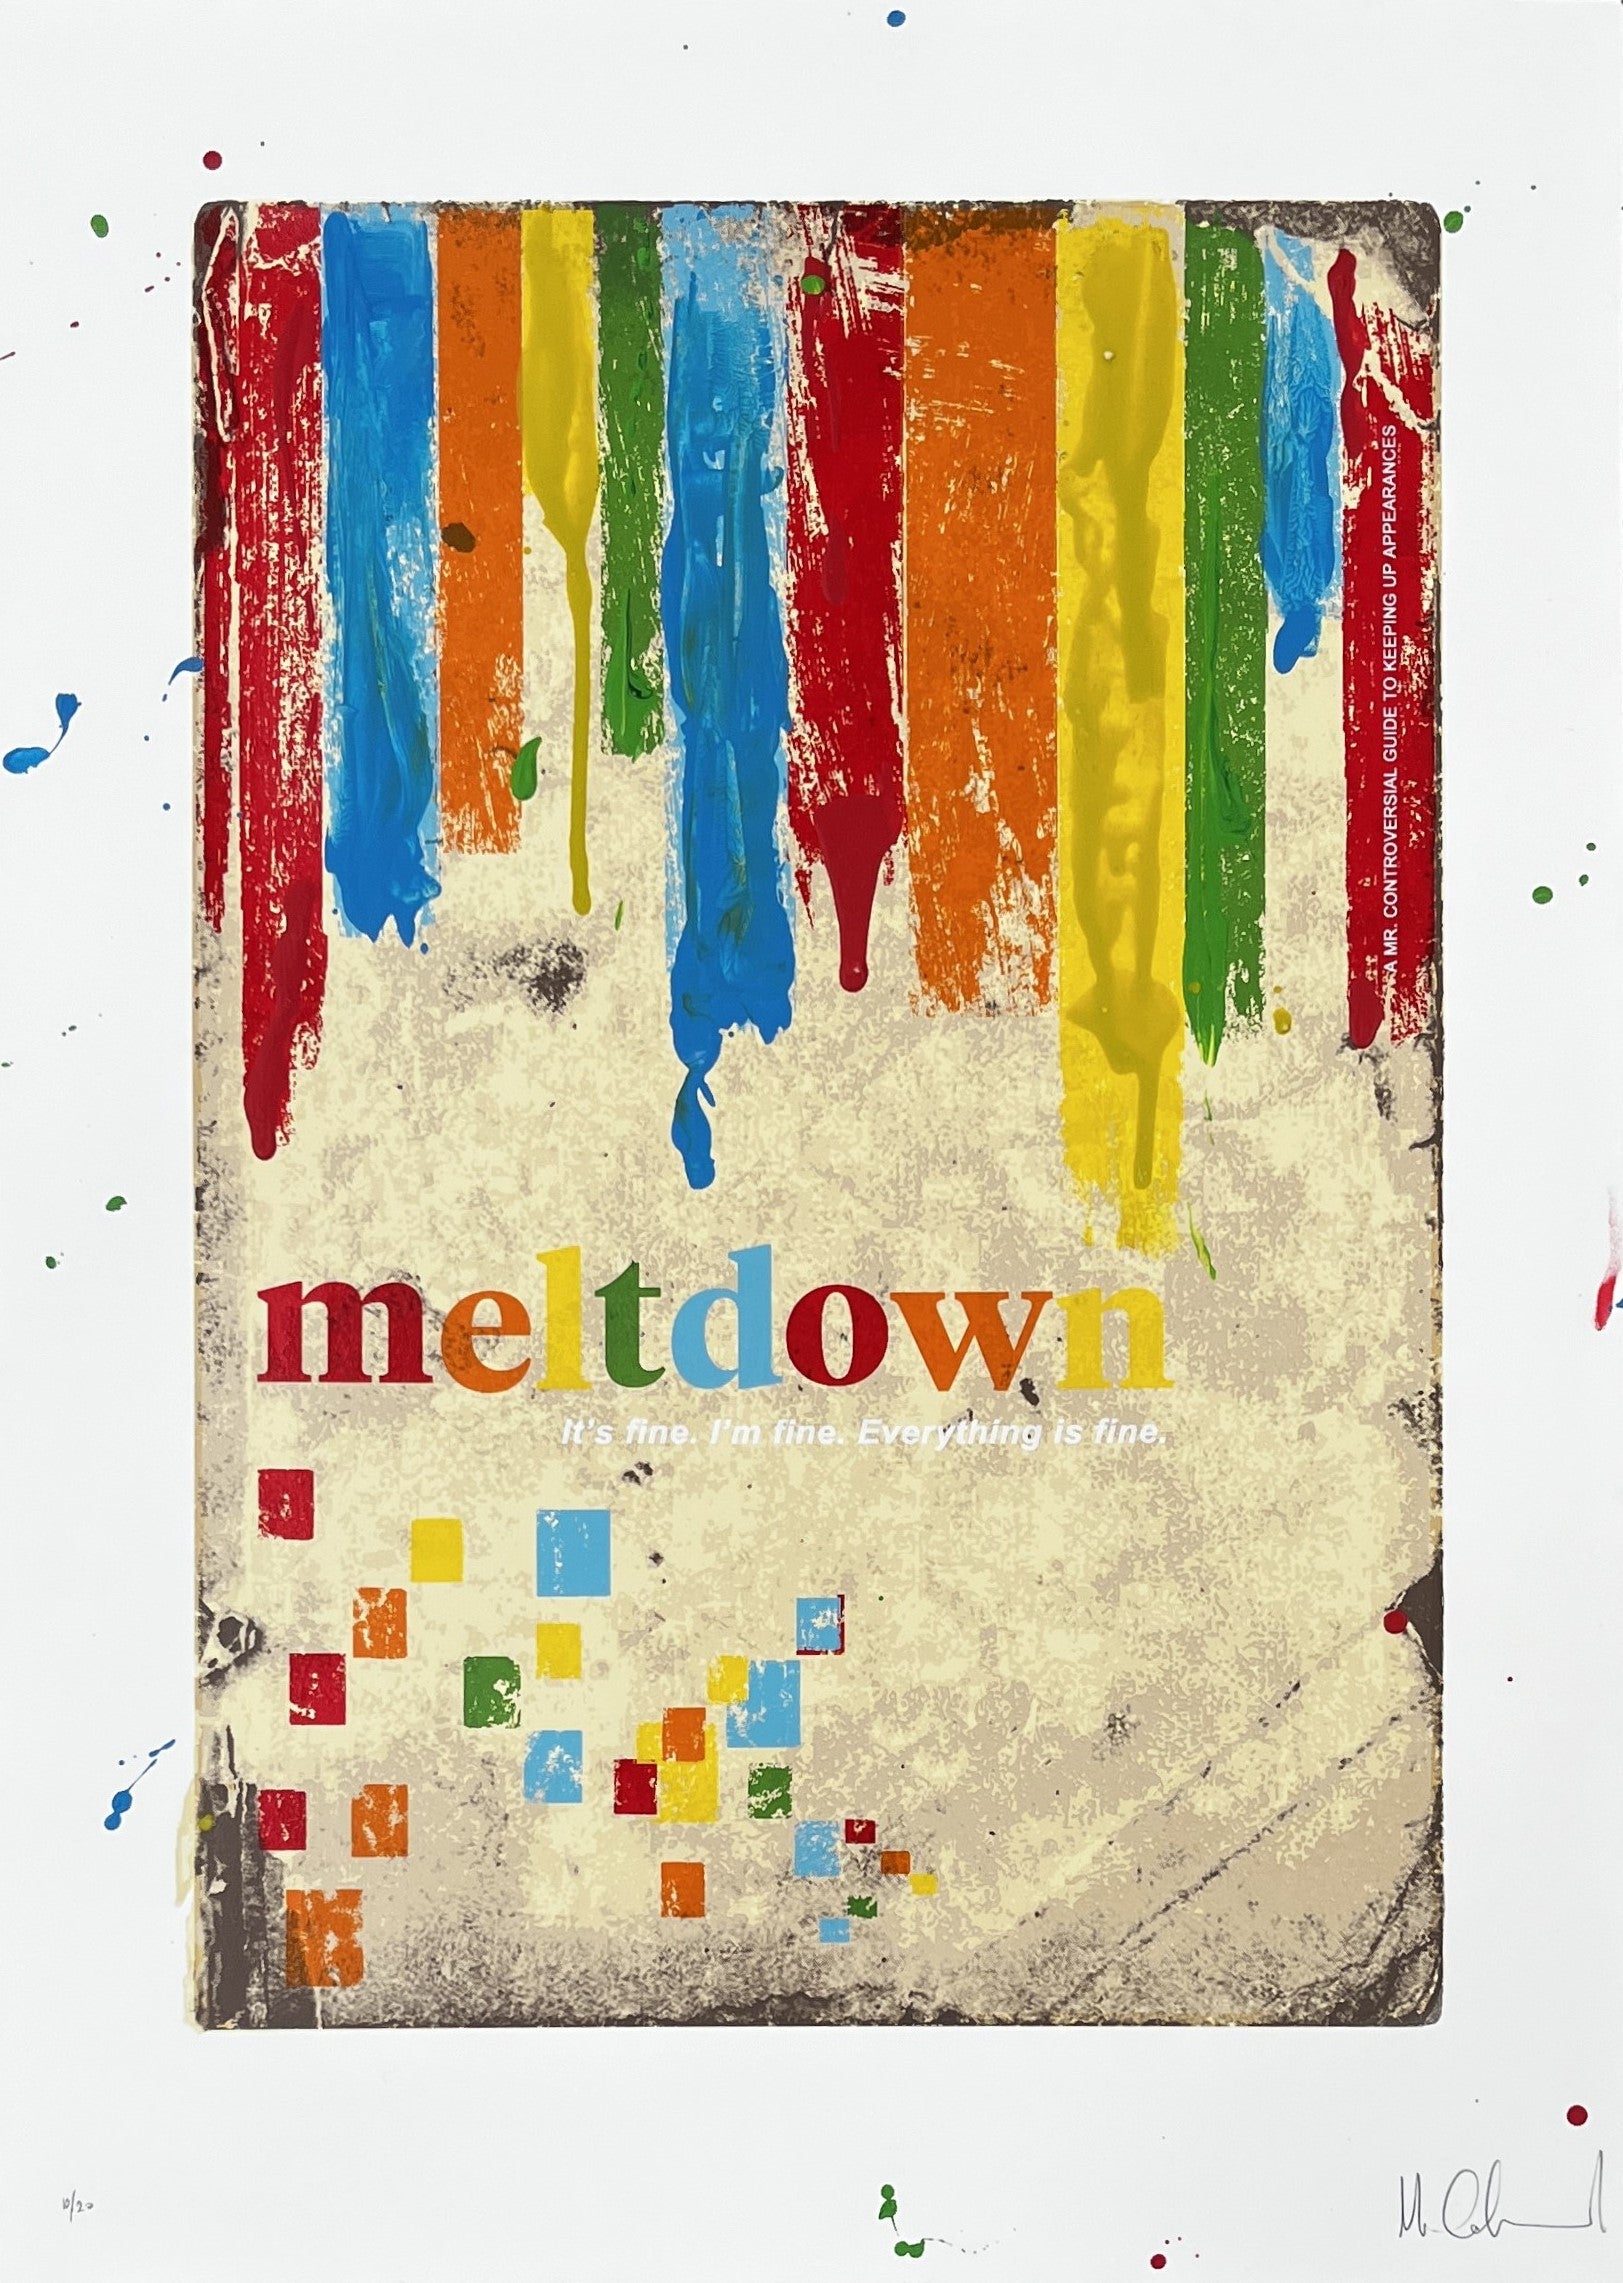 Mr Controversial, Artist, Meltdown, Colour, Colourful, TAP Galleries, Essex Chelmsford Art Gallery 